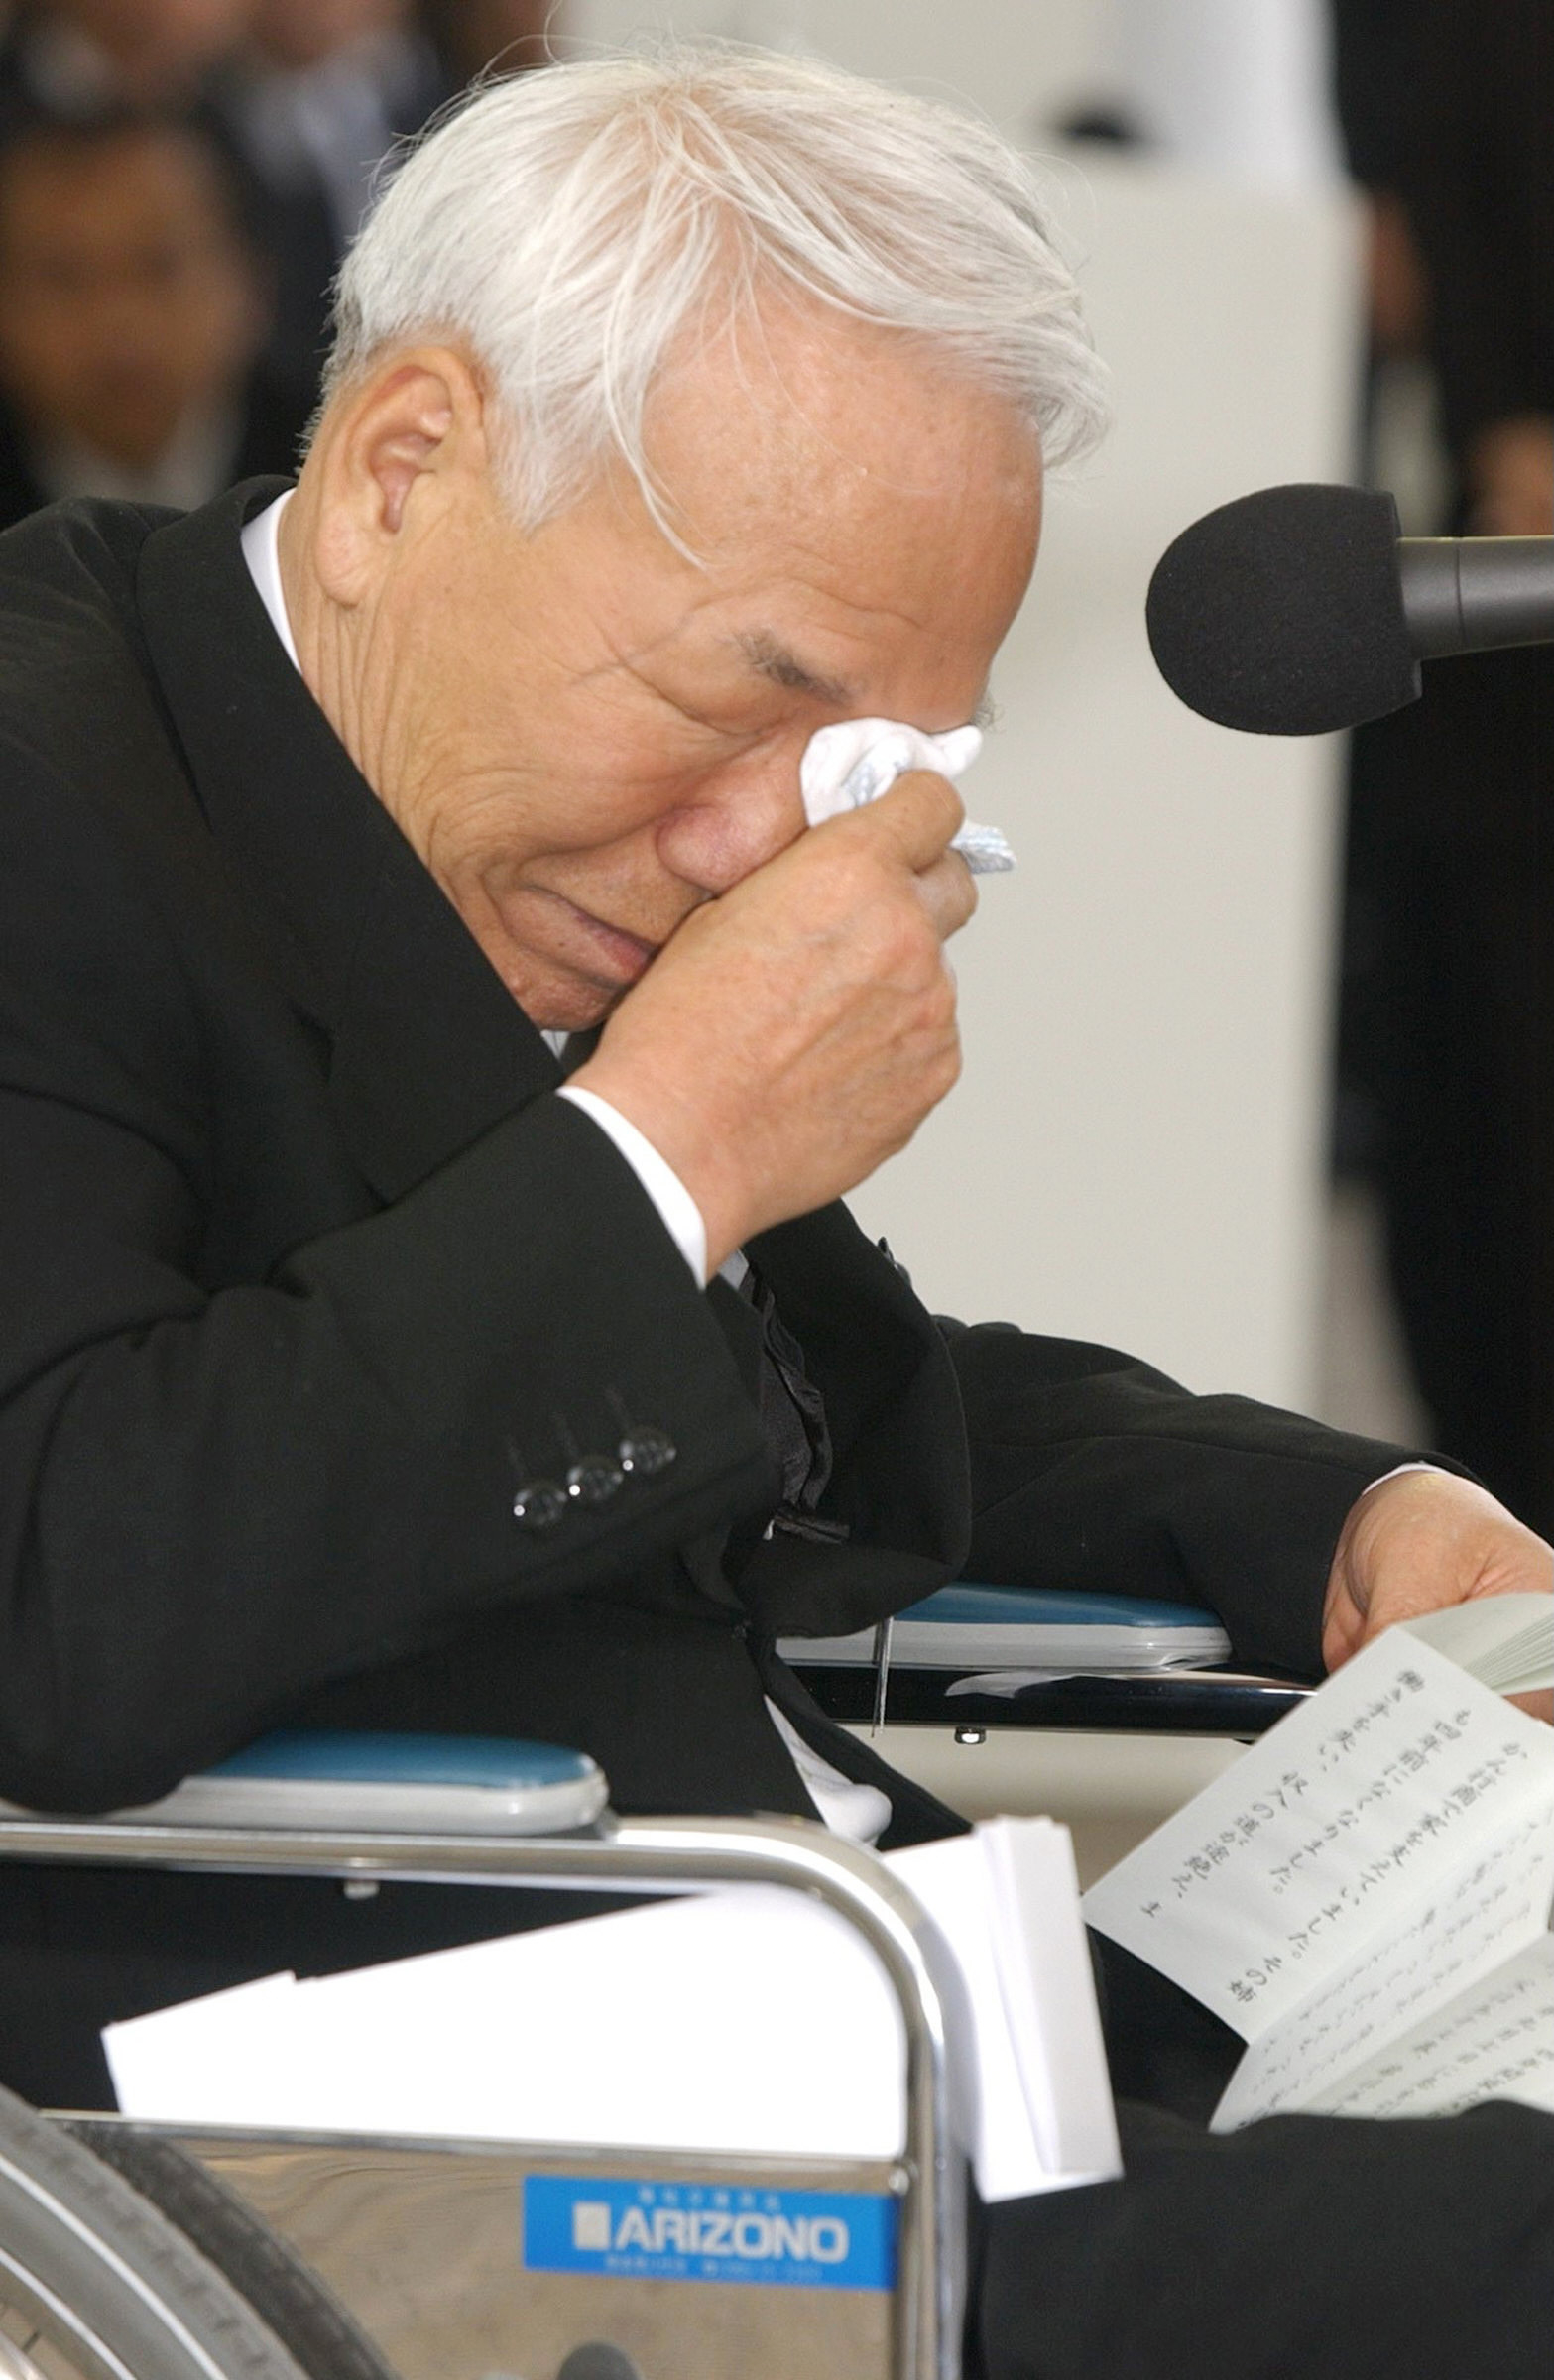 Minamata disease patient Tsuginori Hamamoto cries as he delivers a speech at a 2006 event bringing awareness to the worst health disasters in Japanese history